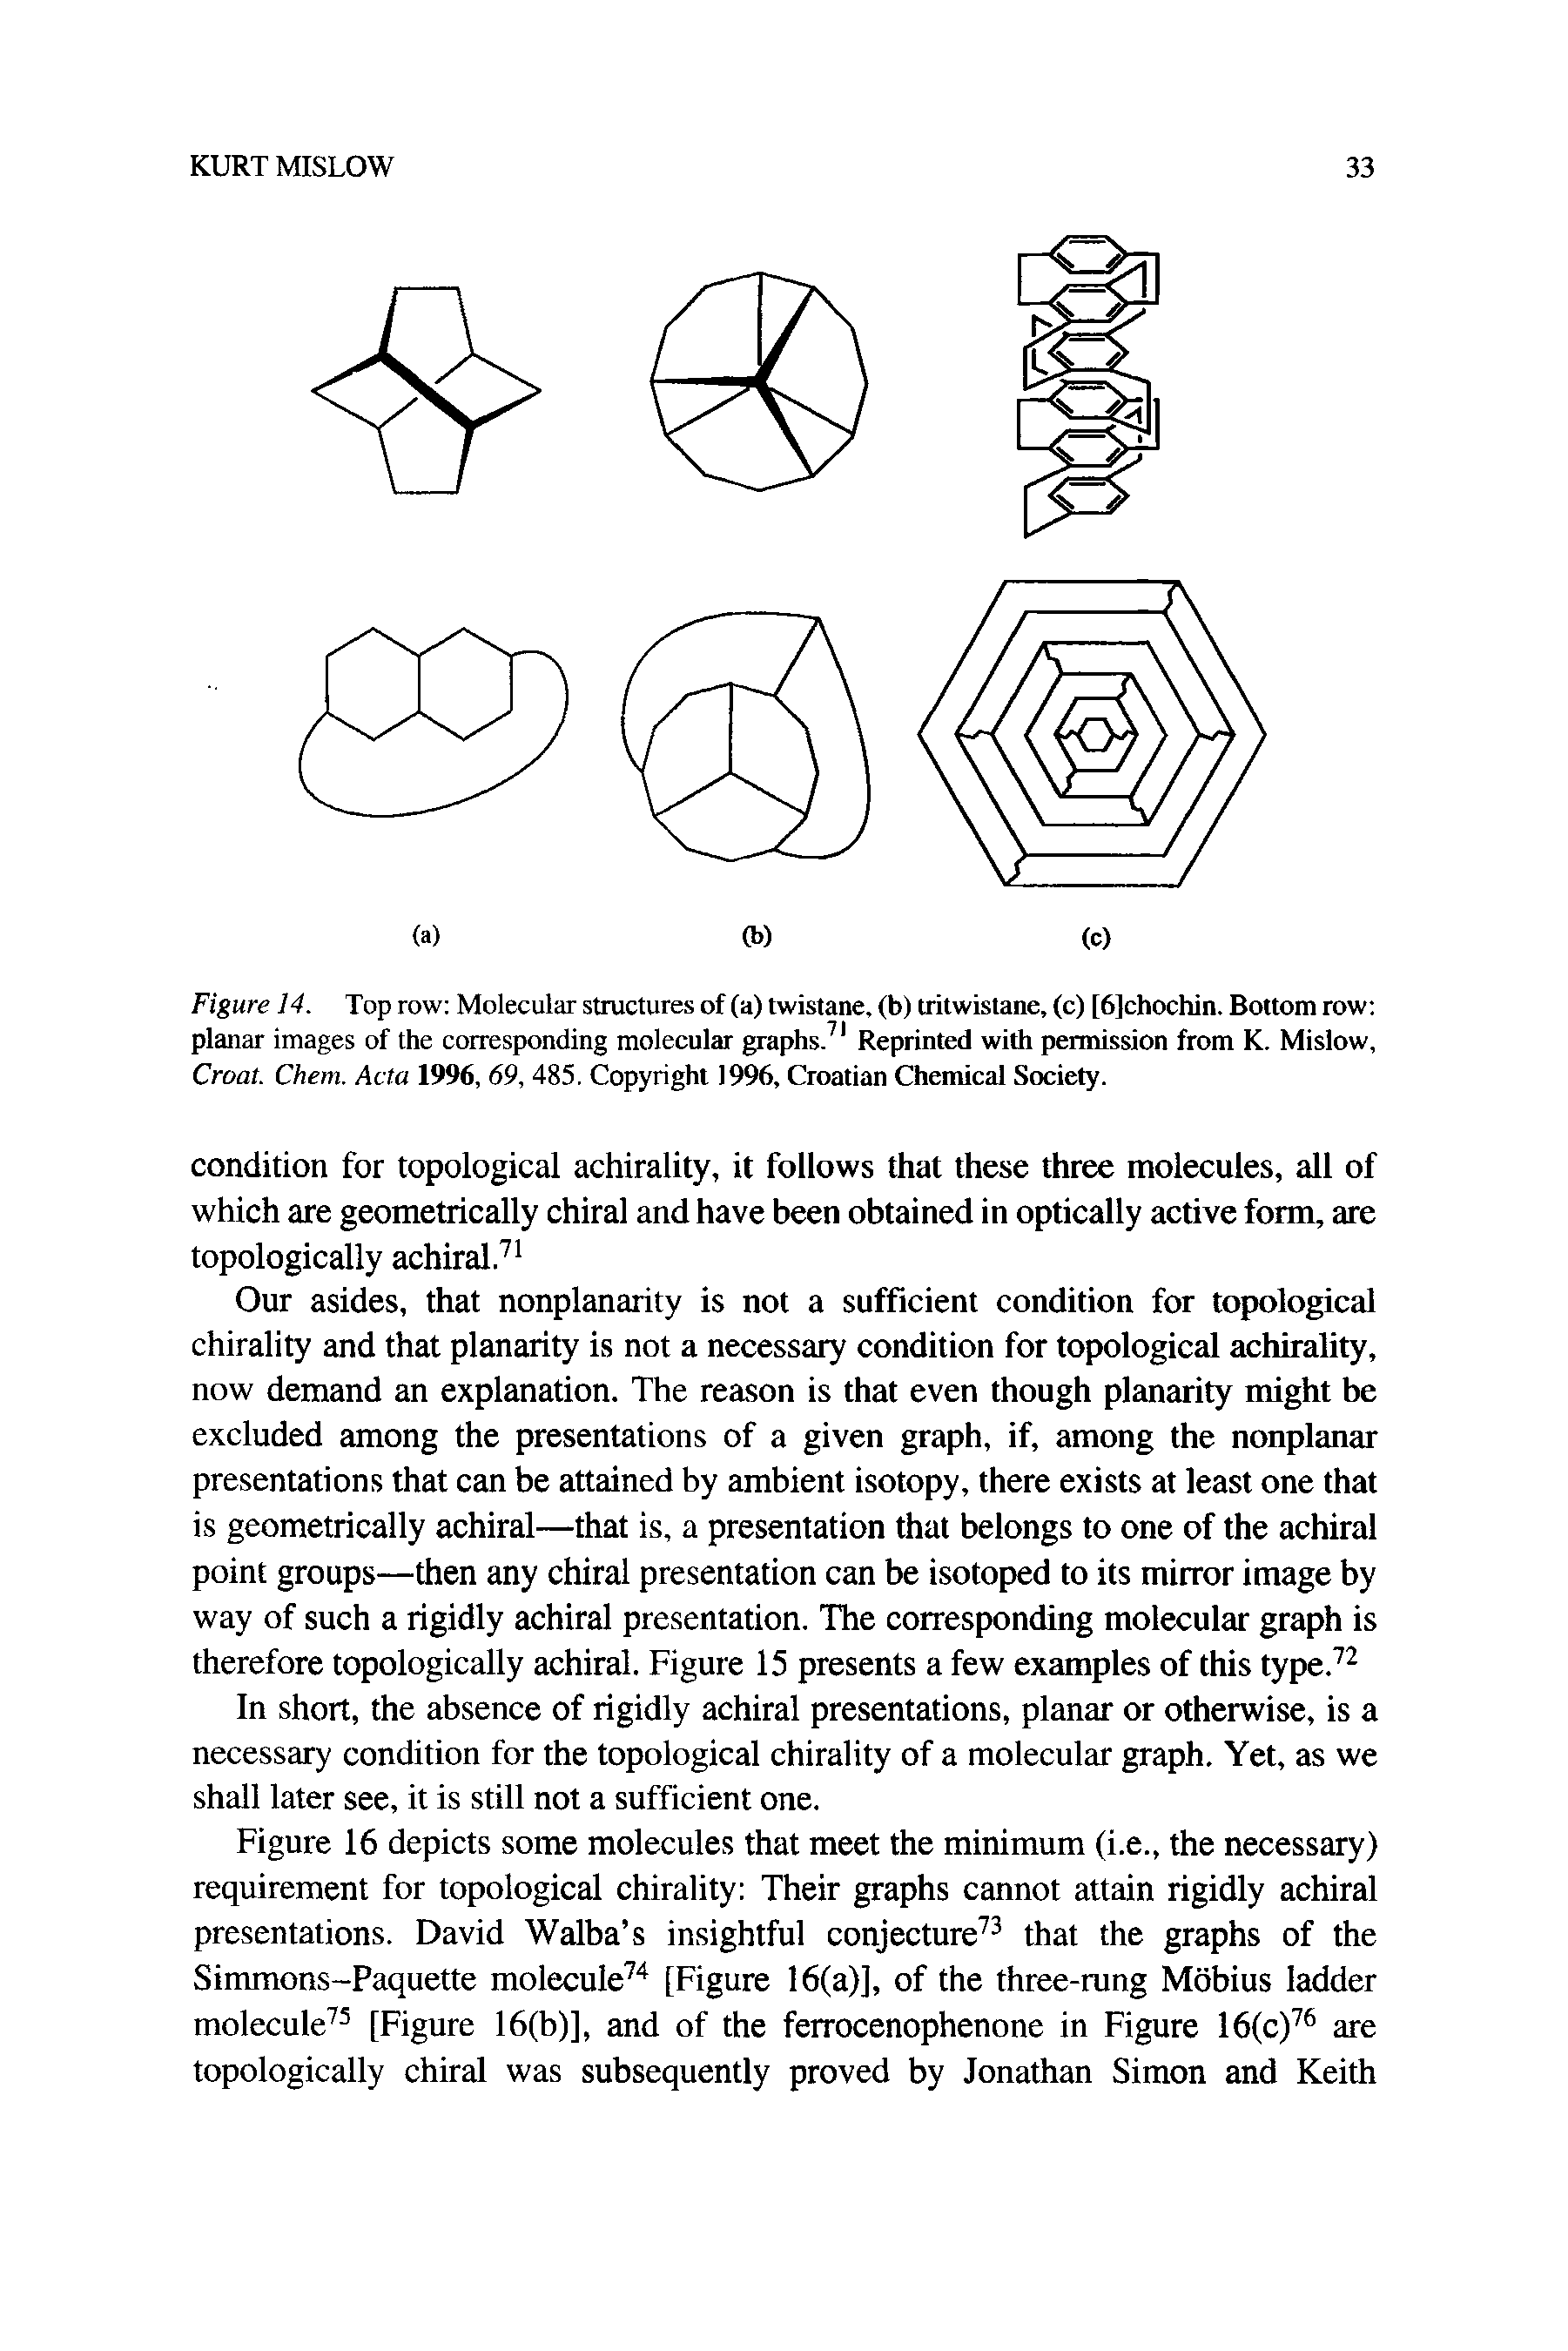 Figure 14. Top row Molecular structures of (a) twistane, (b) tritwistane, (c) [6]chochin. Bottom row planar images of the corresponding molecular graphs.71 Reprinted with permission from K. Mislow, Croat. Chem. Acta 1996, 69, 485. Copyright 1996, Croatian Chemical Society.